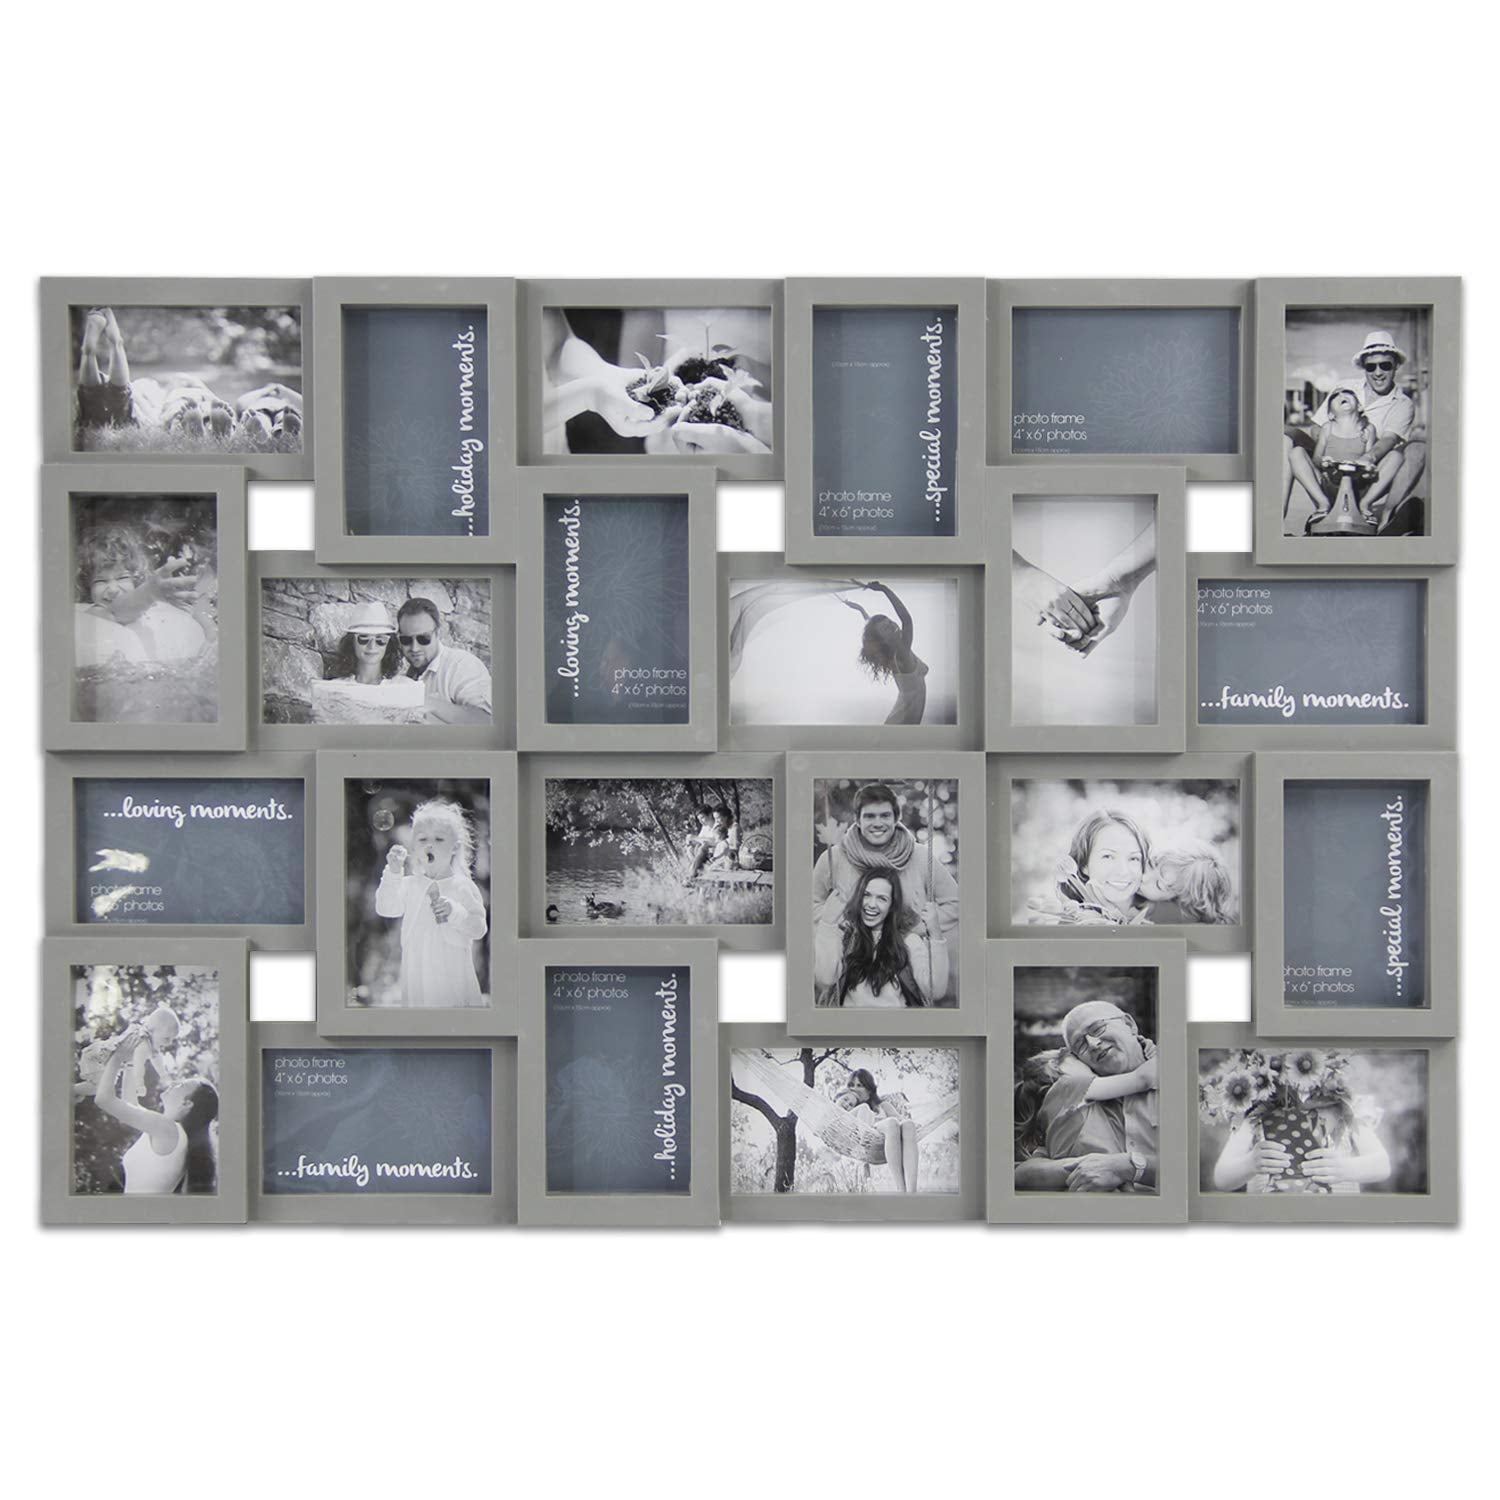 Lilian Fake Metal Dark Grey Pattern Collage Display 5x7 Inch Photo Frame 2-Pack Wall Mounting Material Included